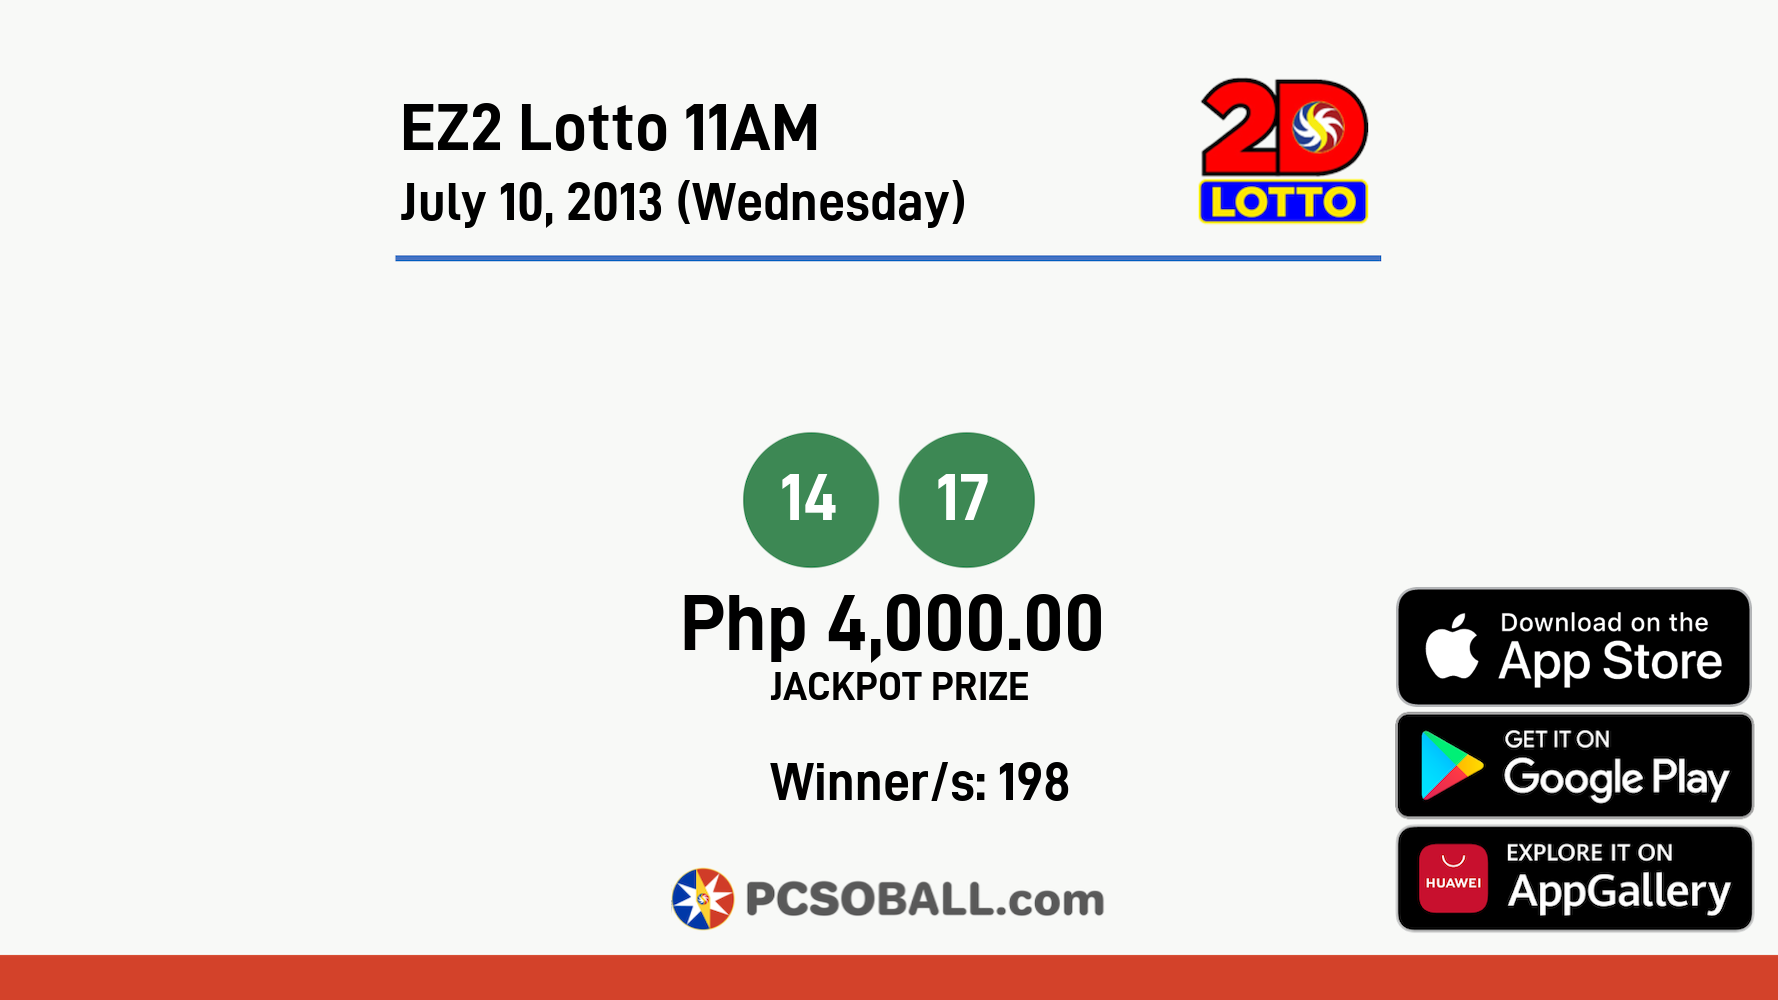 EZ2 Lotto 11AM July 10, 2013 (Wednesday) Result